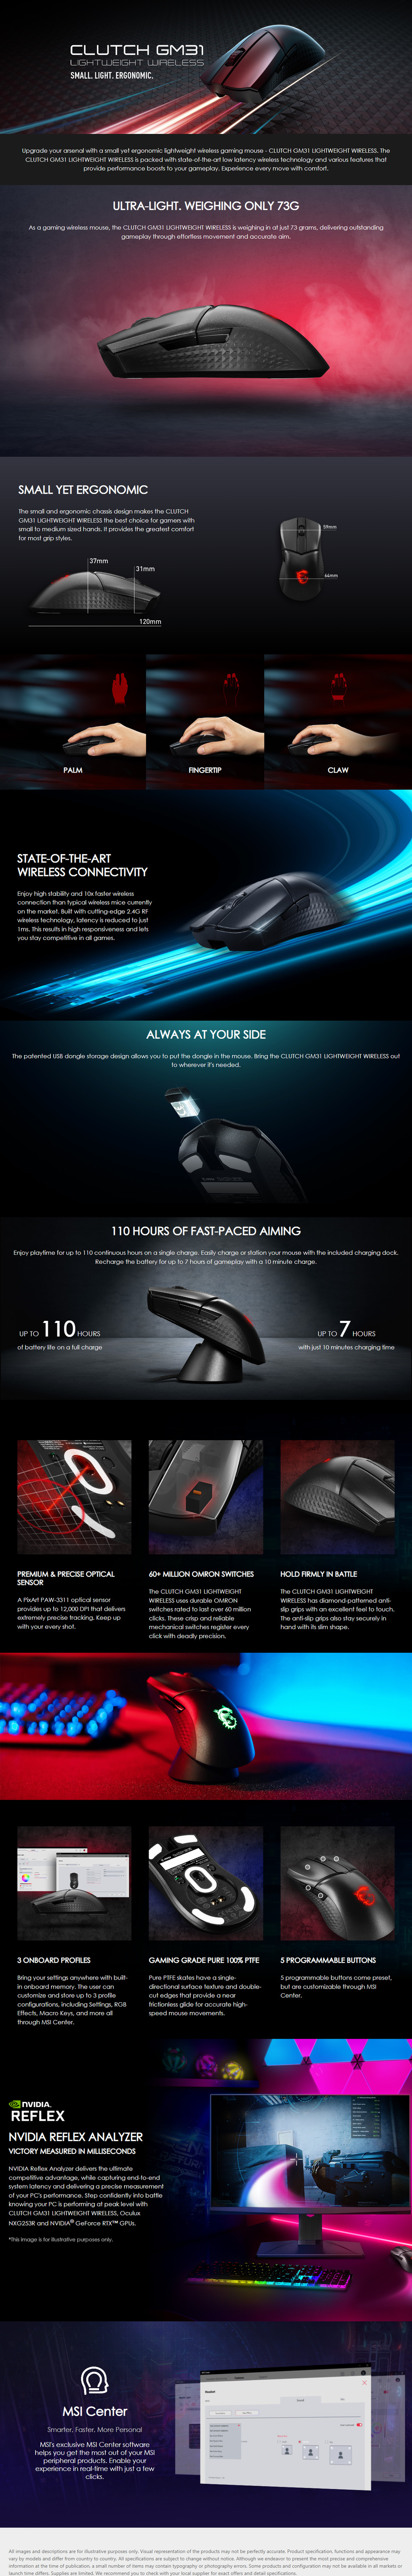 msi clutch gm31 lightweight wireless gaming mouse